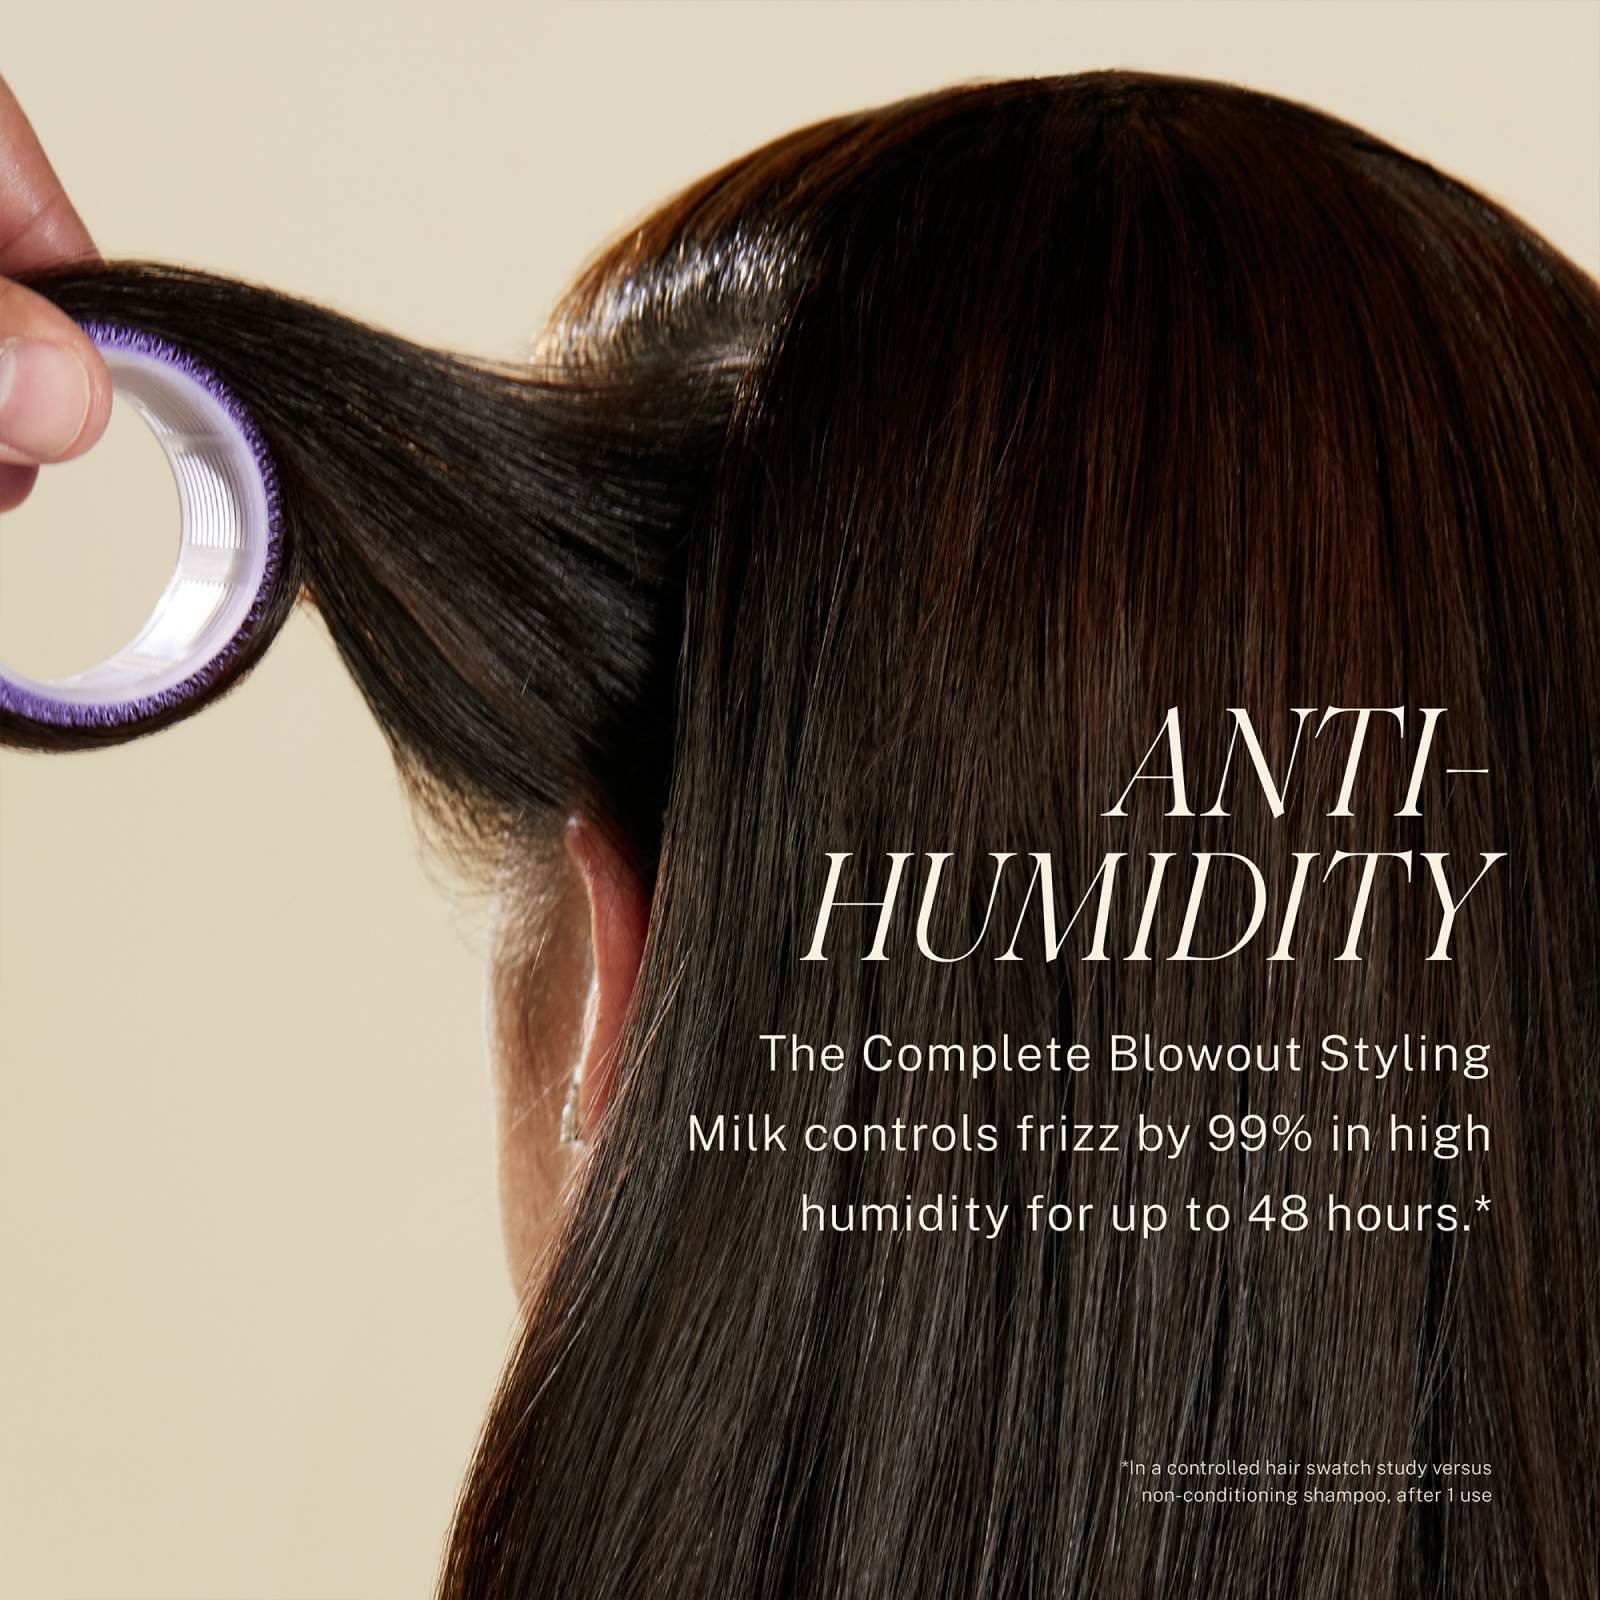 Anti Humidity Complete Blowout Styling Milk controls frizz by 99% in high humidity for up to 48 hours